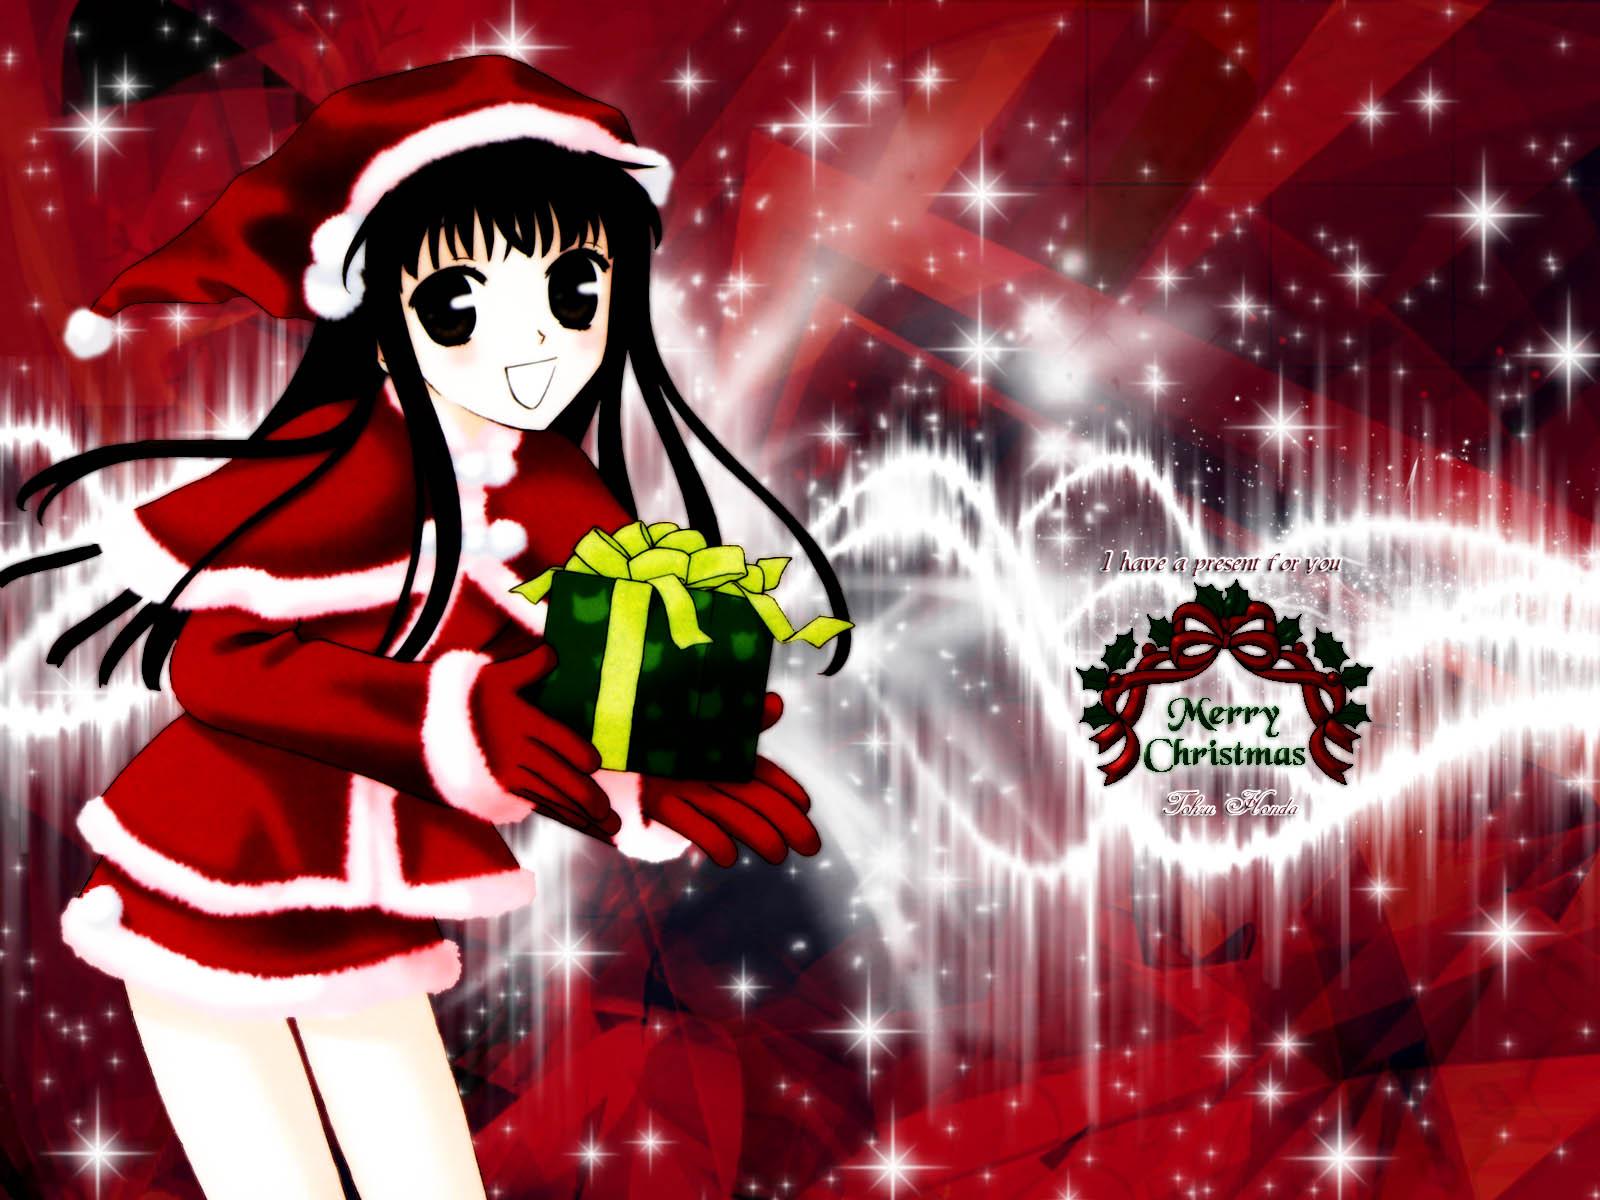 Anime Merry Christmas wallpaper in 2560x1440 resolution